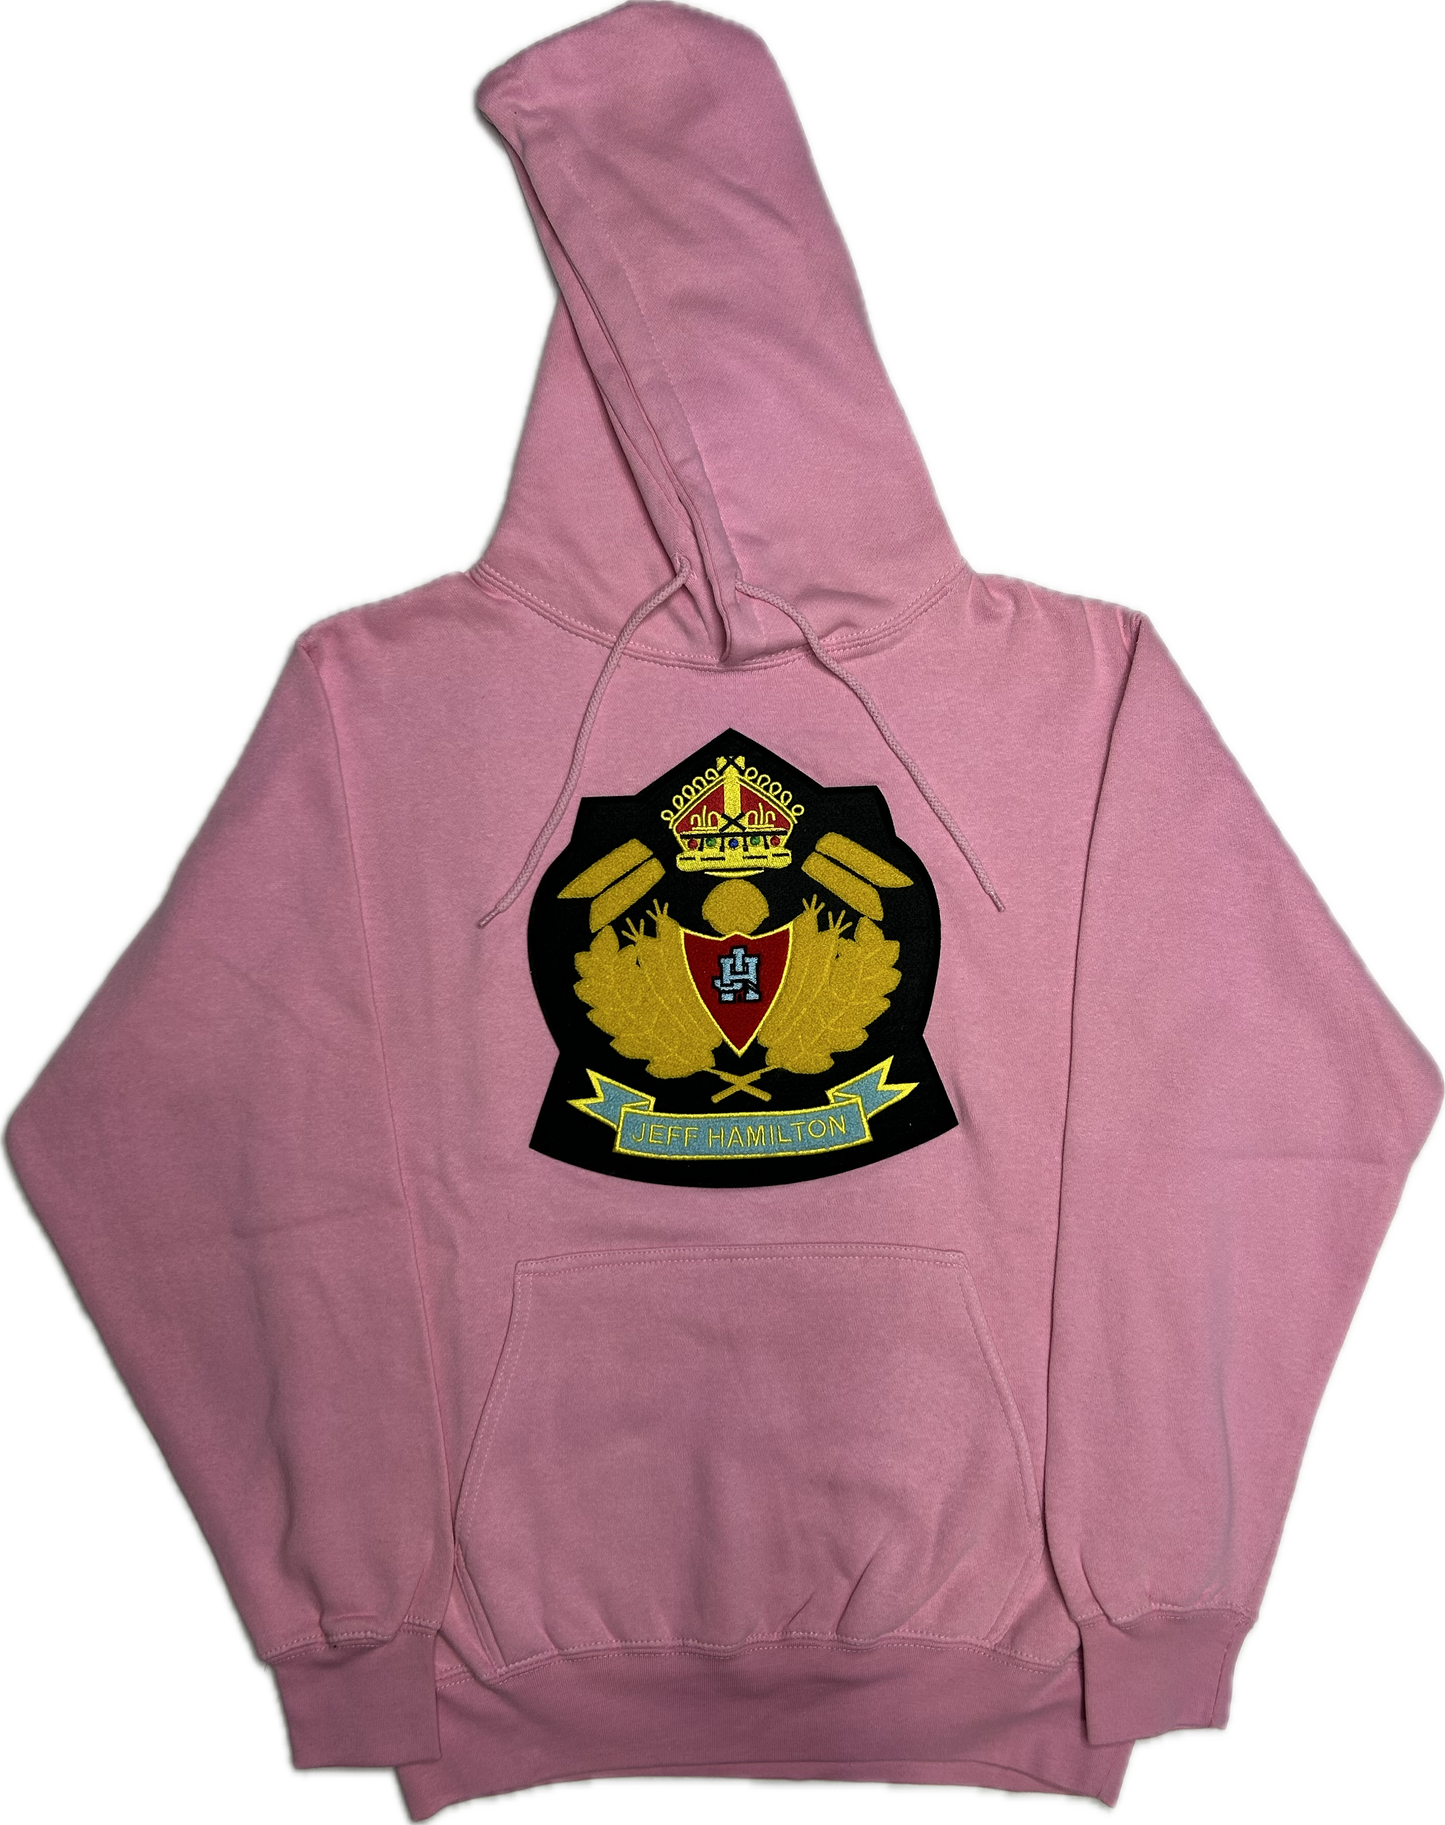 JEFF HAMITLON YELLOW AND BLUE PATCH PINK HOODIE